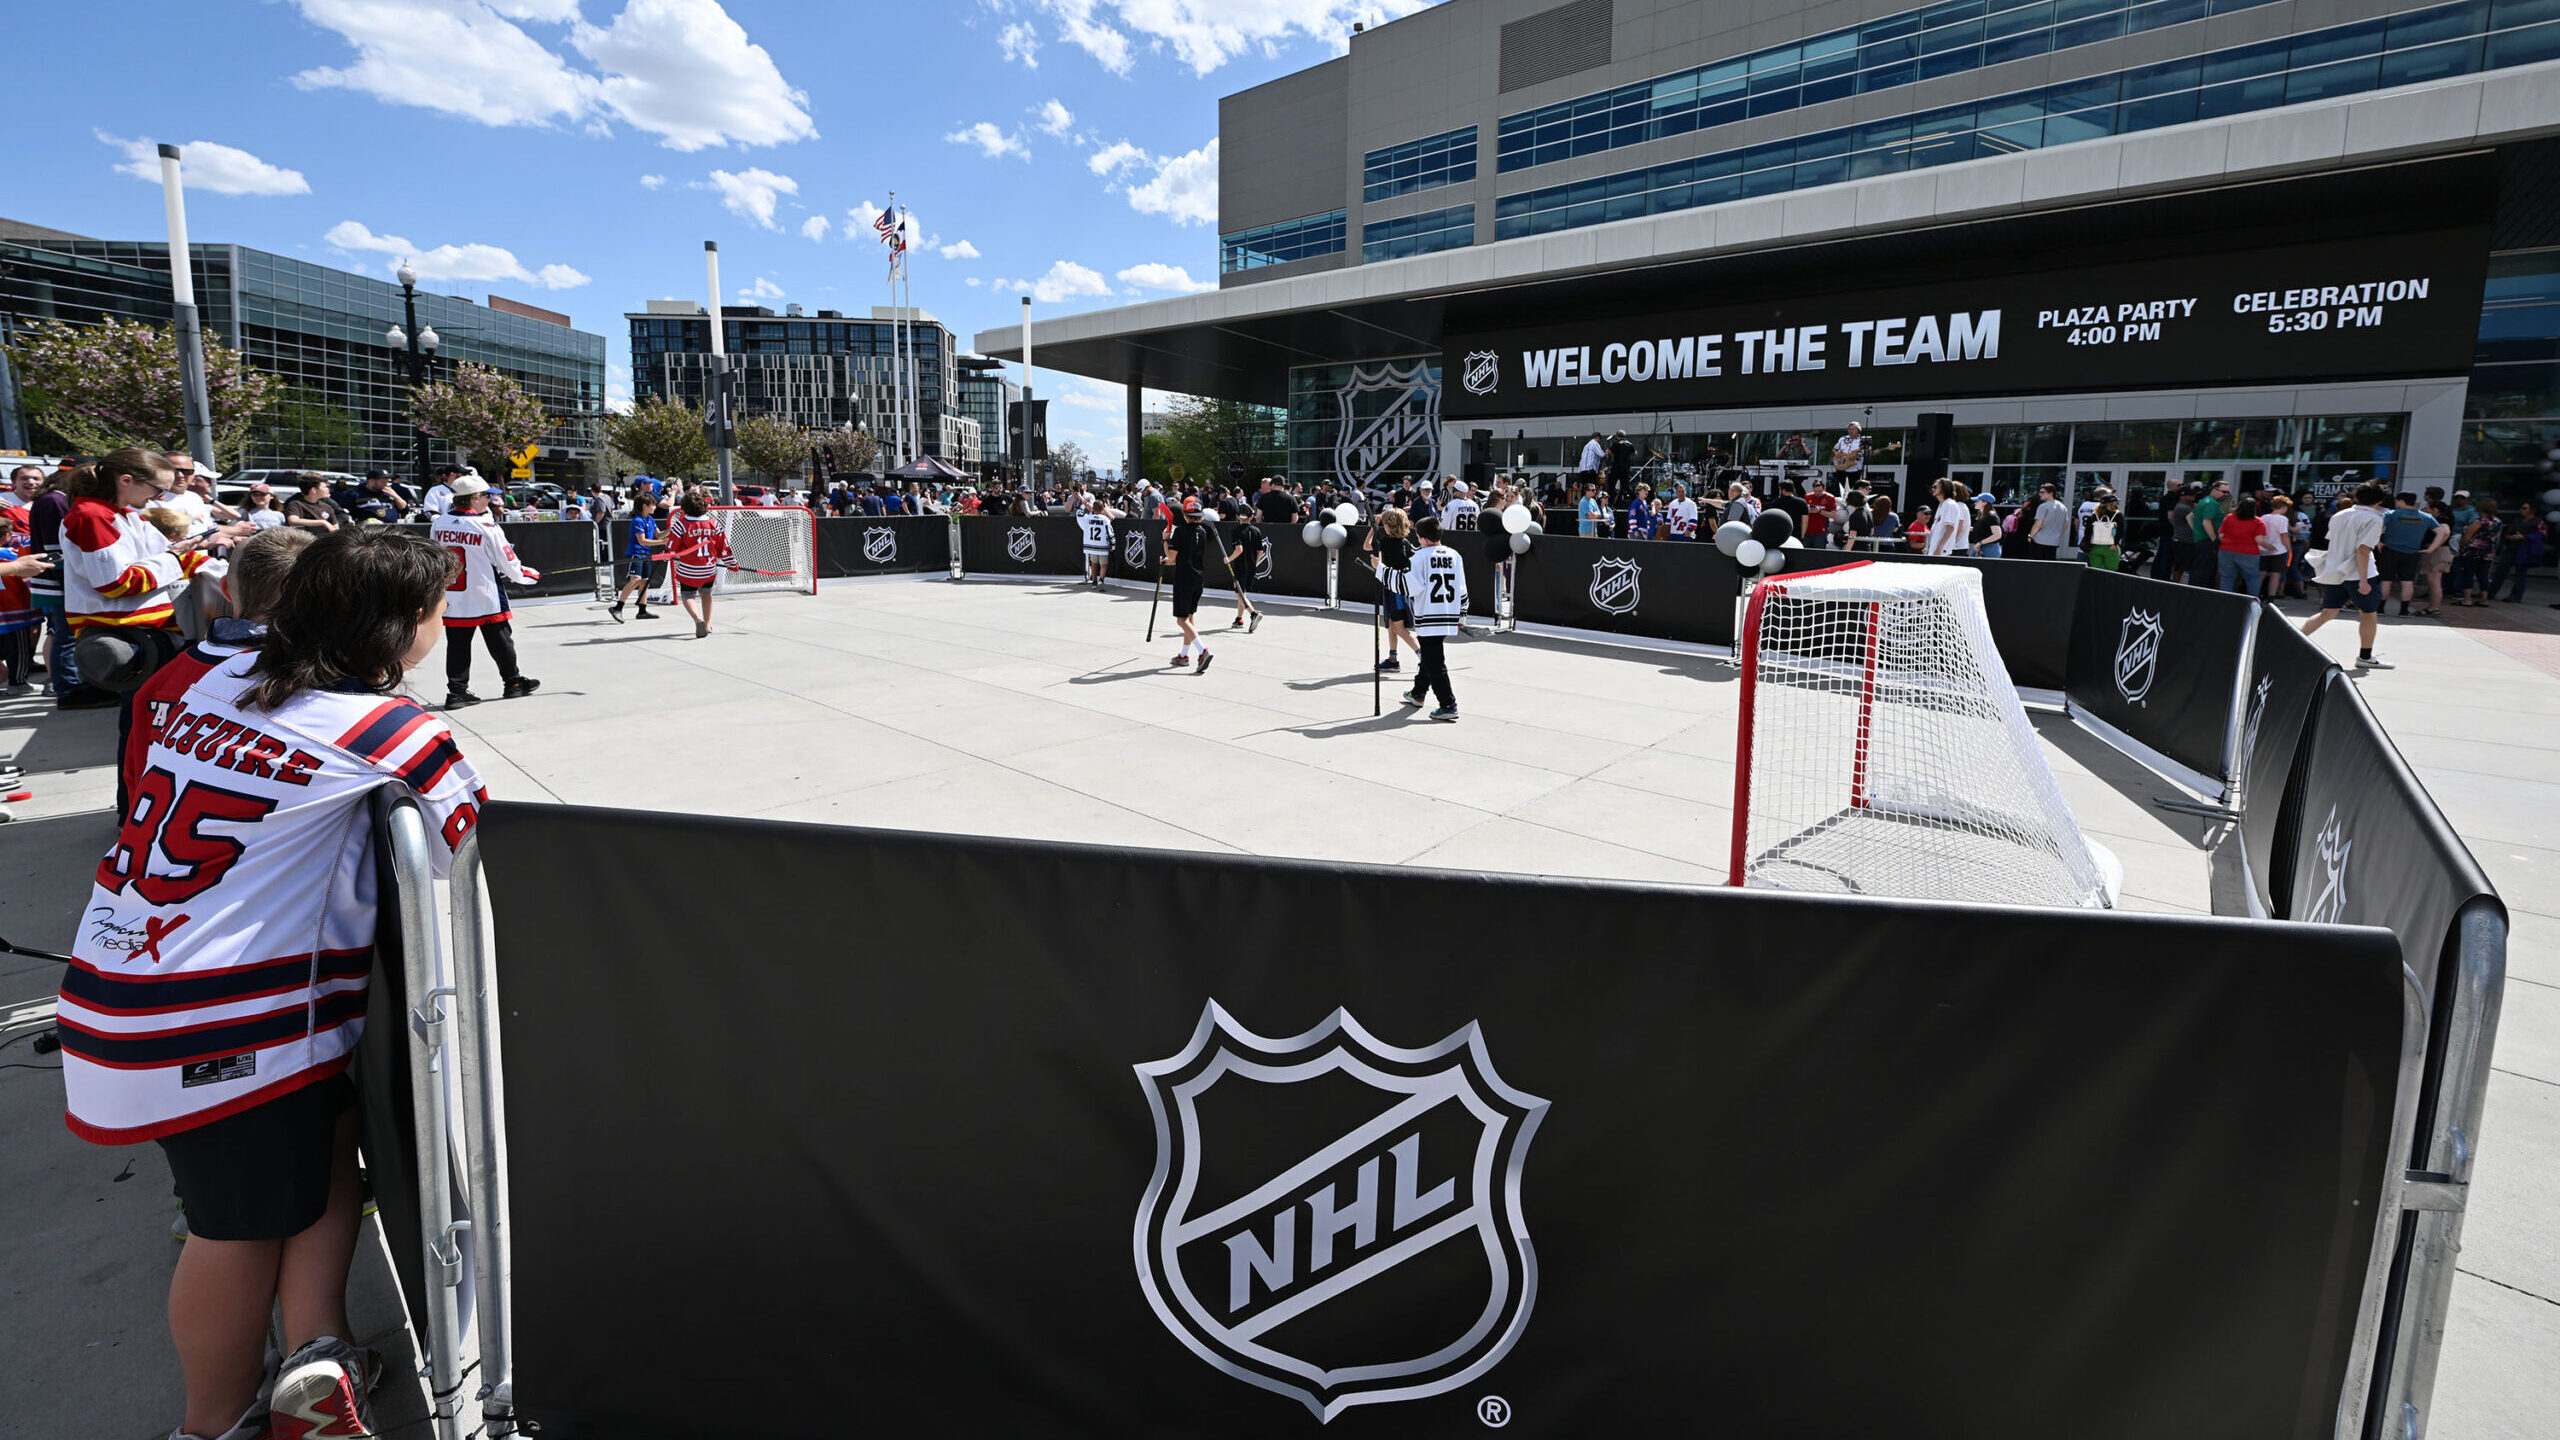 Kids play street hockey ahead of the doors opening as thousands attend the NHL event at the Delta C...